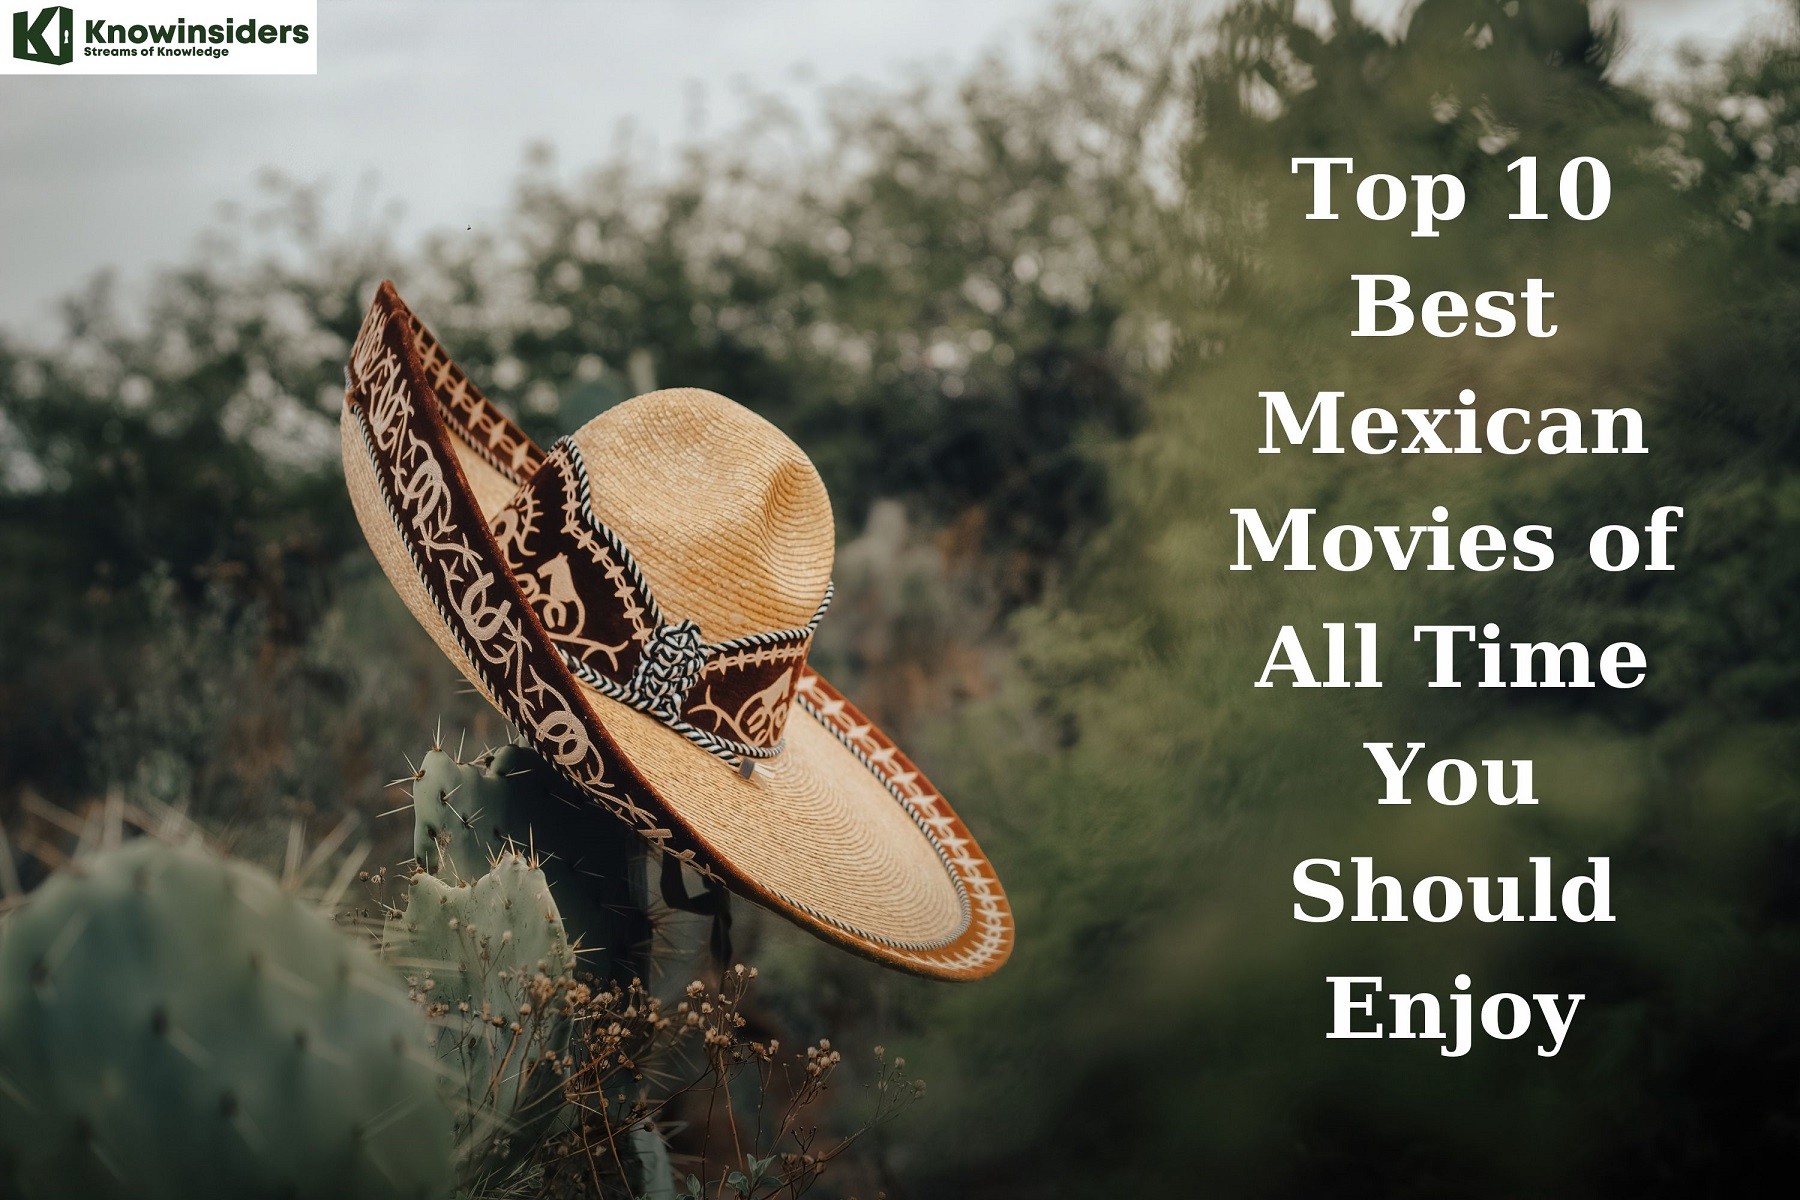 Top 10 Most Popular Mexican Movies of All Time You Should Enjoy